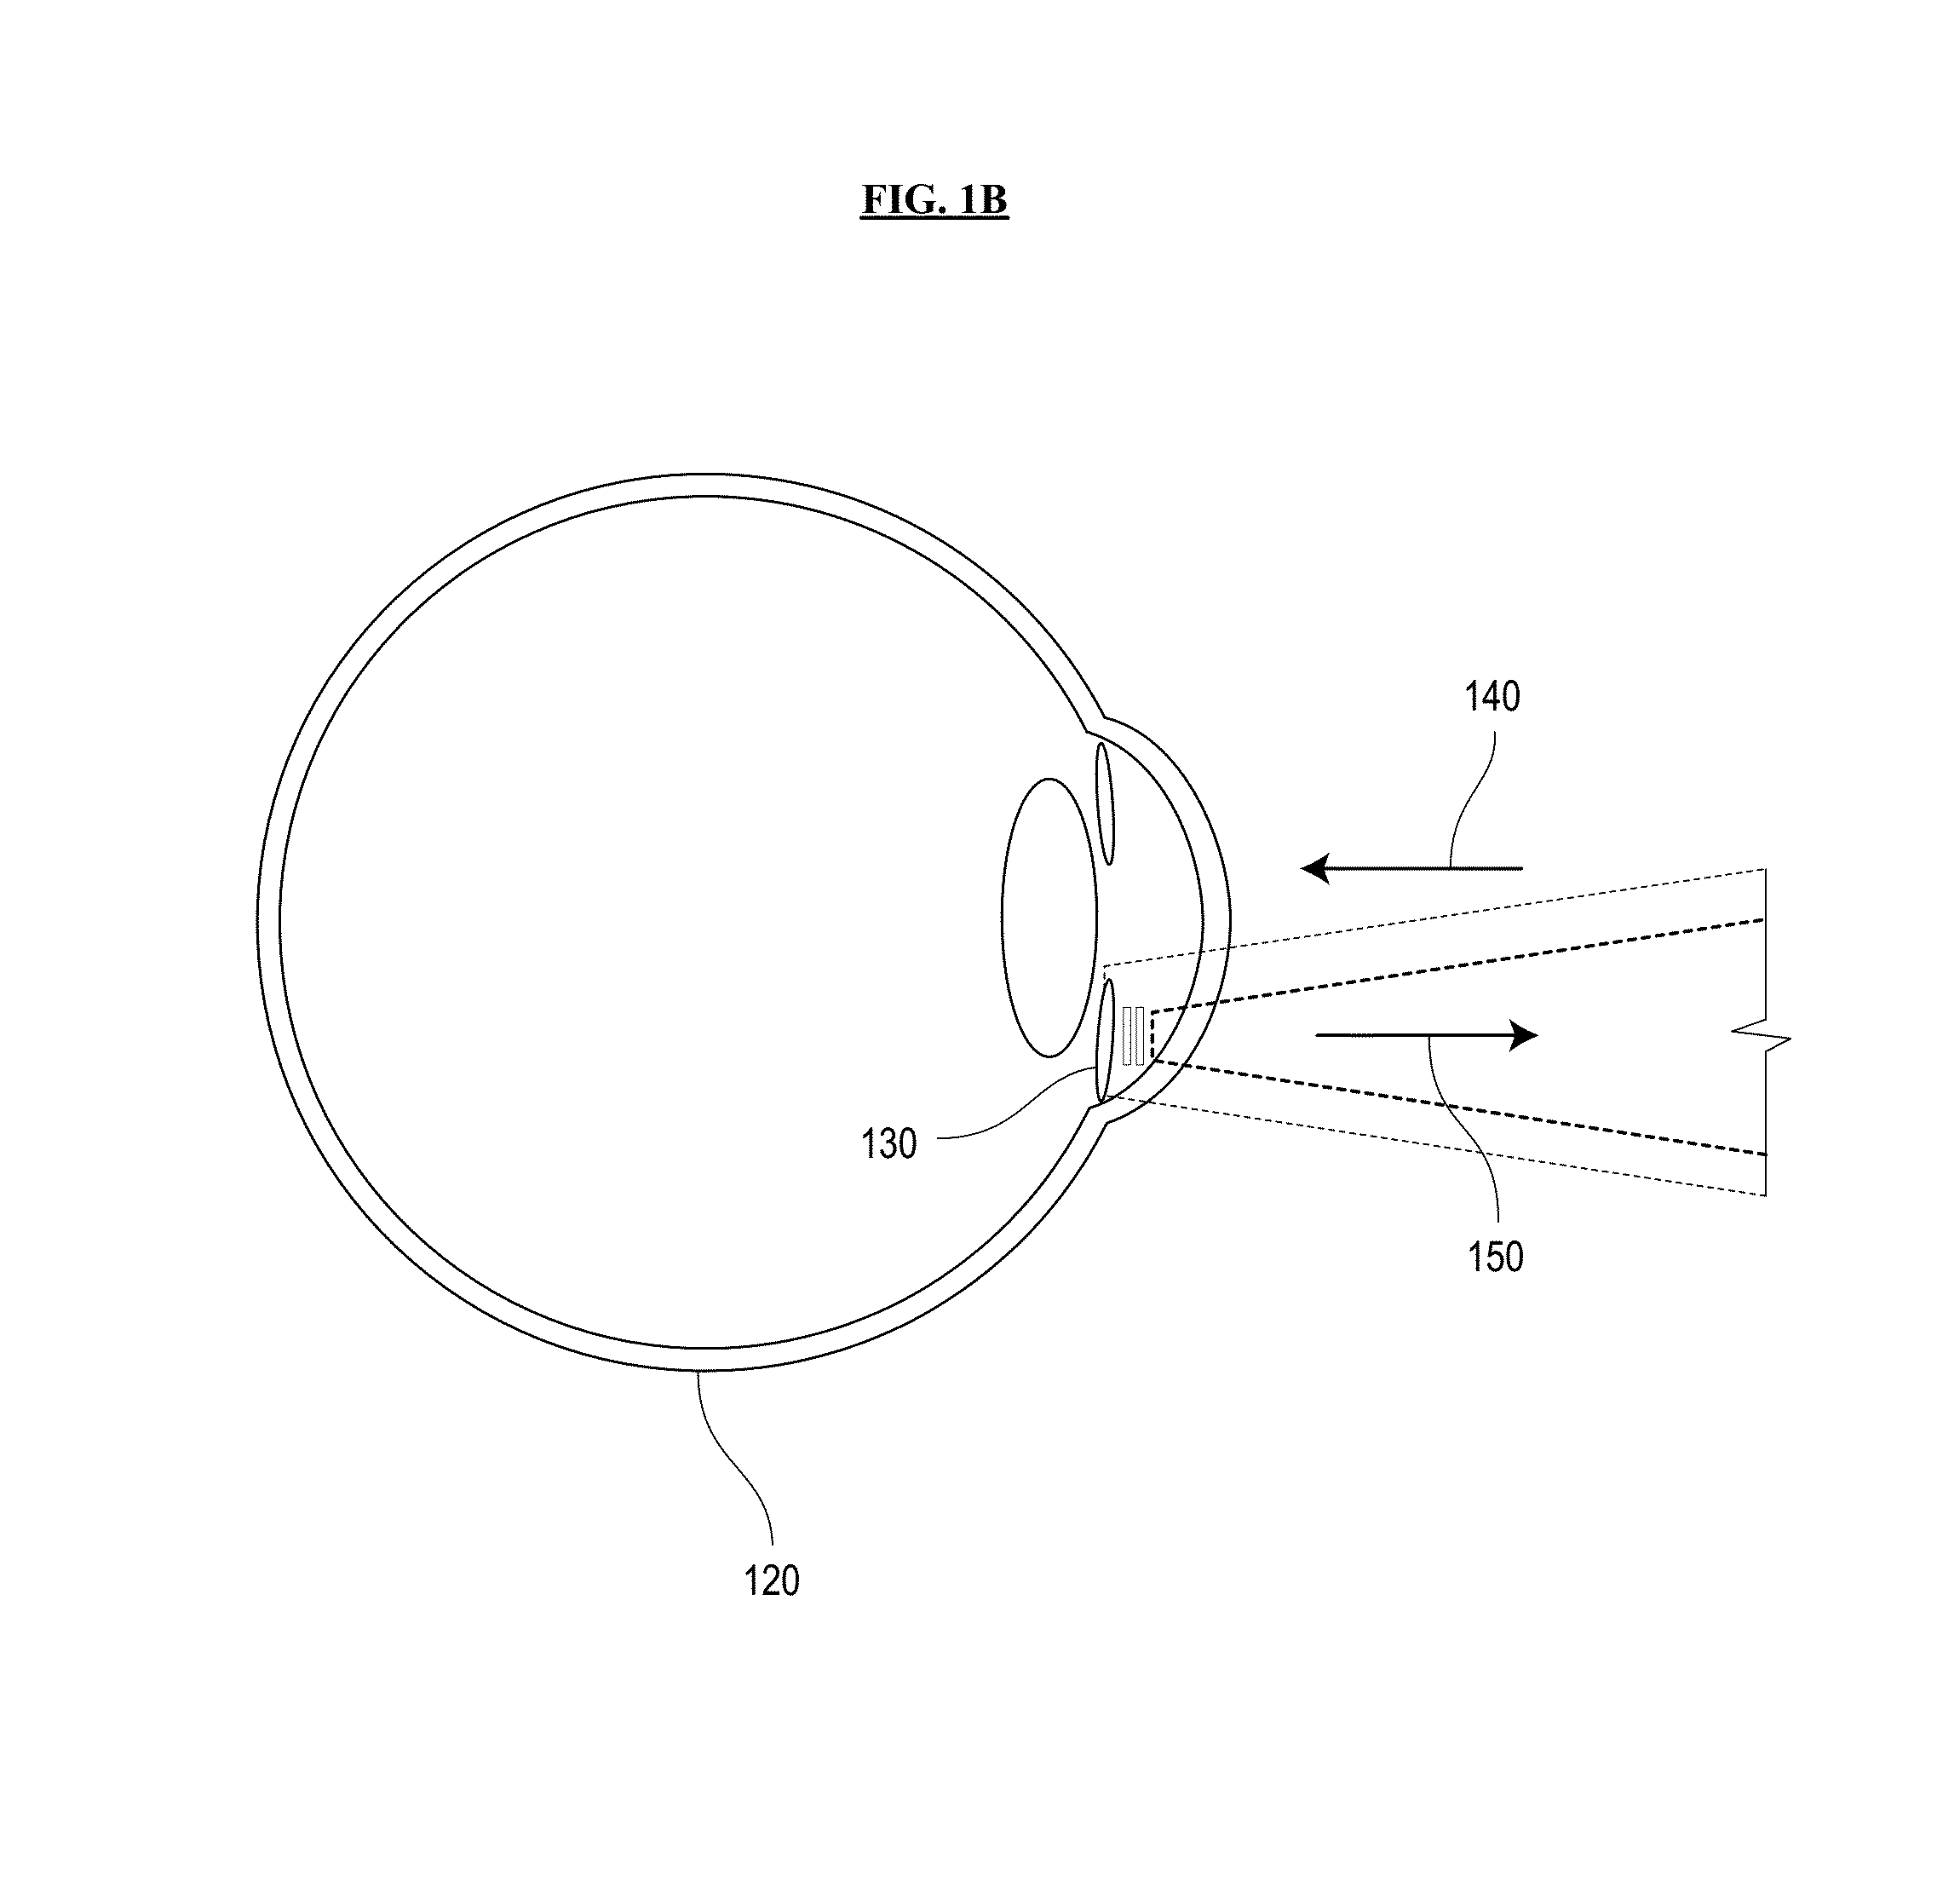 System and method for sensing intraocular pressure